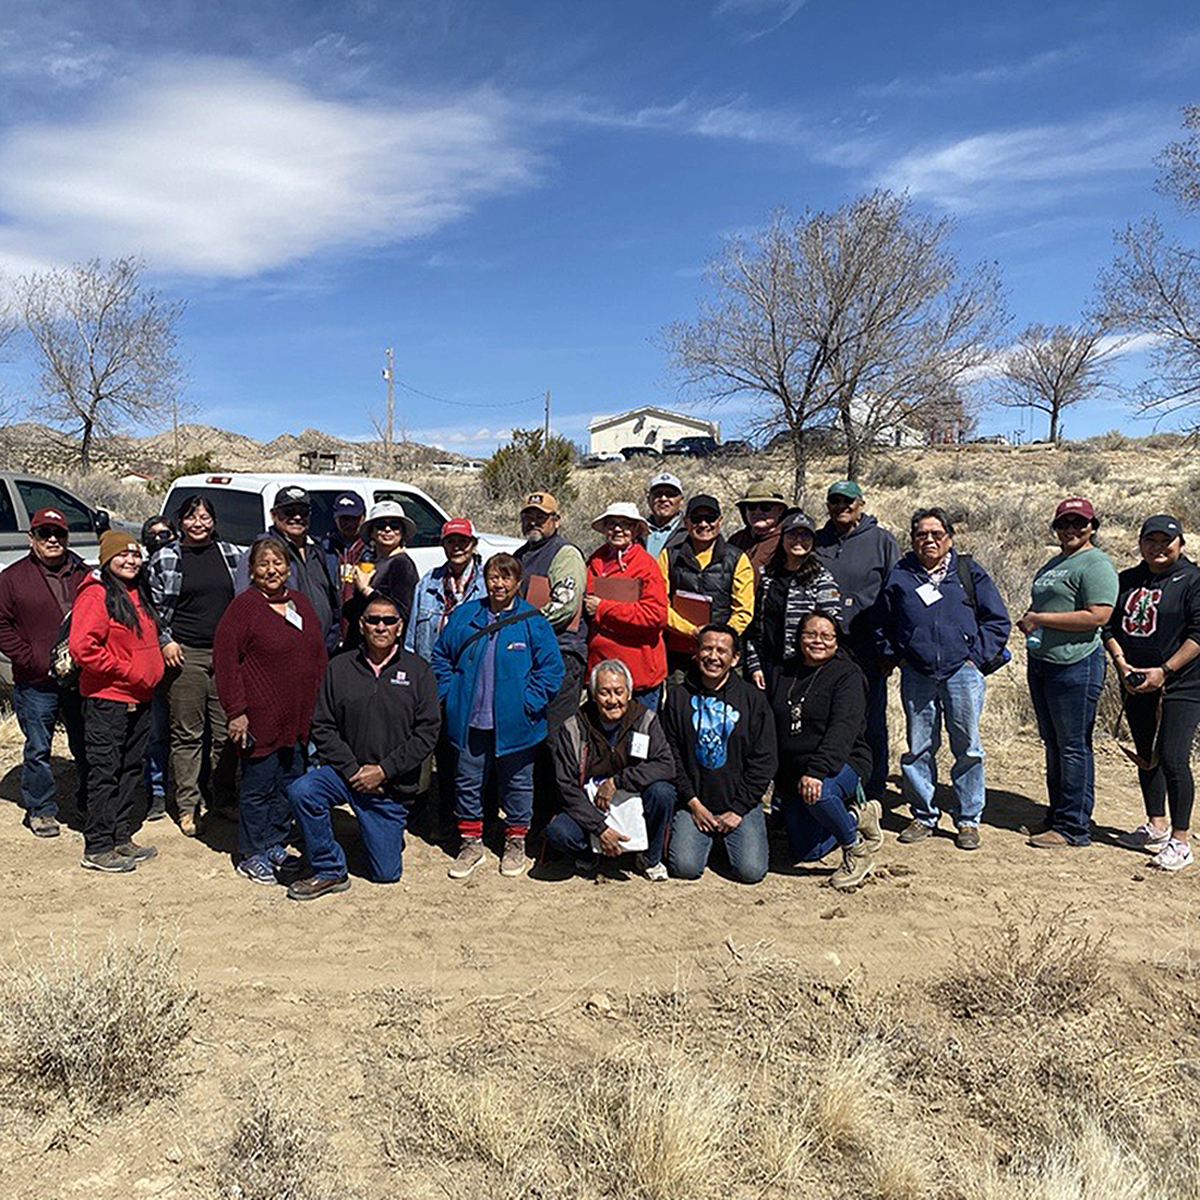 Last week, First Nations’ Stewarding #NativeLands team was onsite in New Mexico, convening Native farmers and ranchers for a three-day #conservation planning workshop in District 14 on the Navajo Nation. Learn more about the importance of these trainings: bit.ly/3vvh5dL